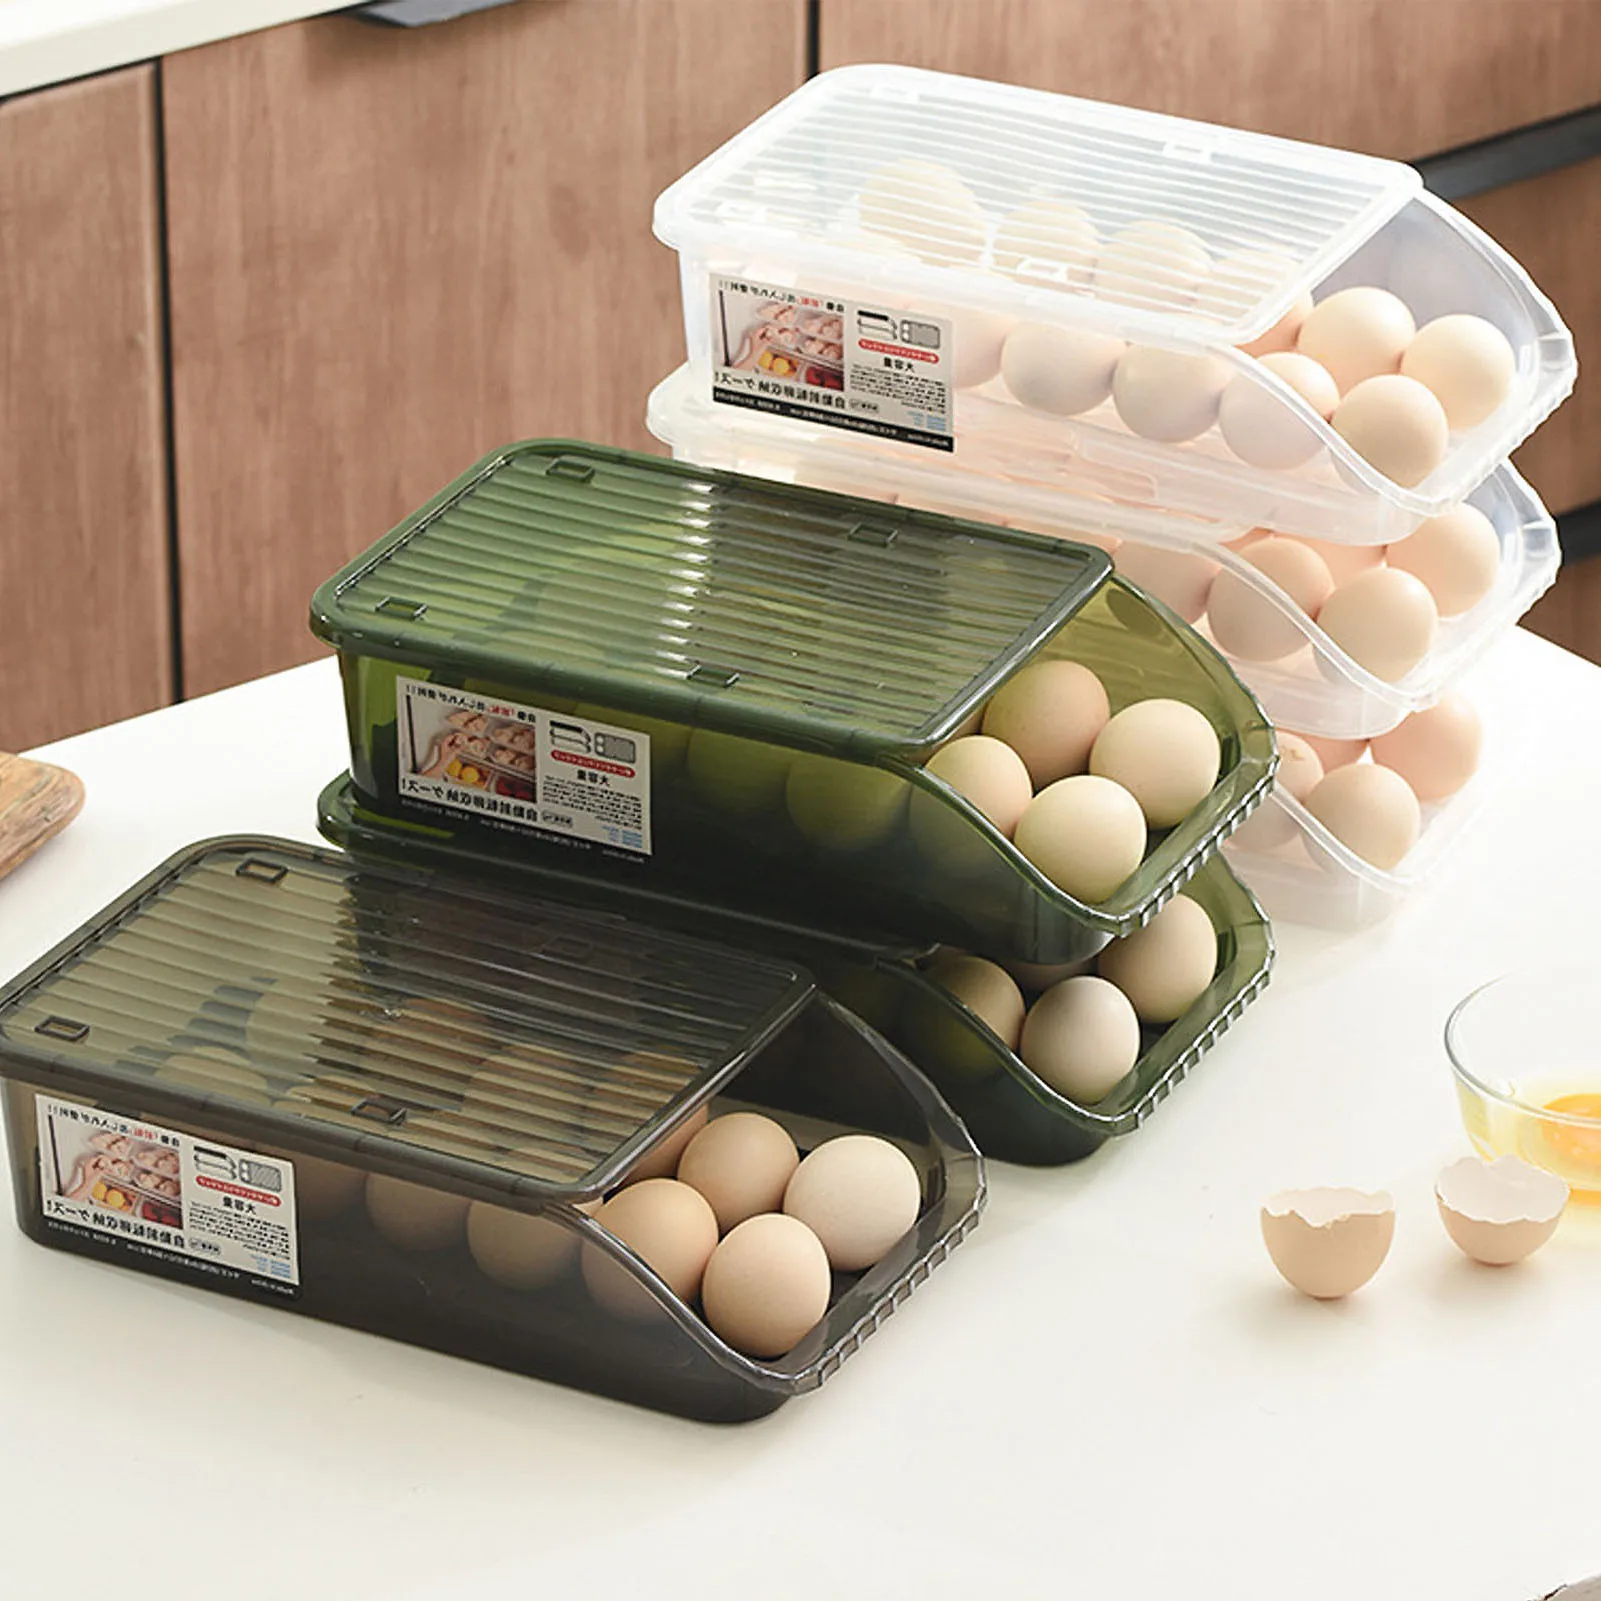 

Automatic rolling egg box Refrigerator Rack Holder for fresh-keeping box Fridge egg Basket storage containers kitchen organizers